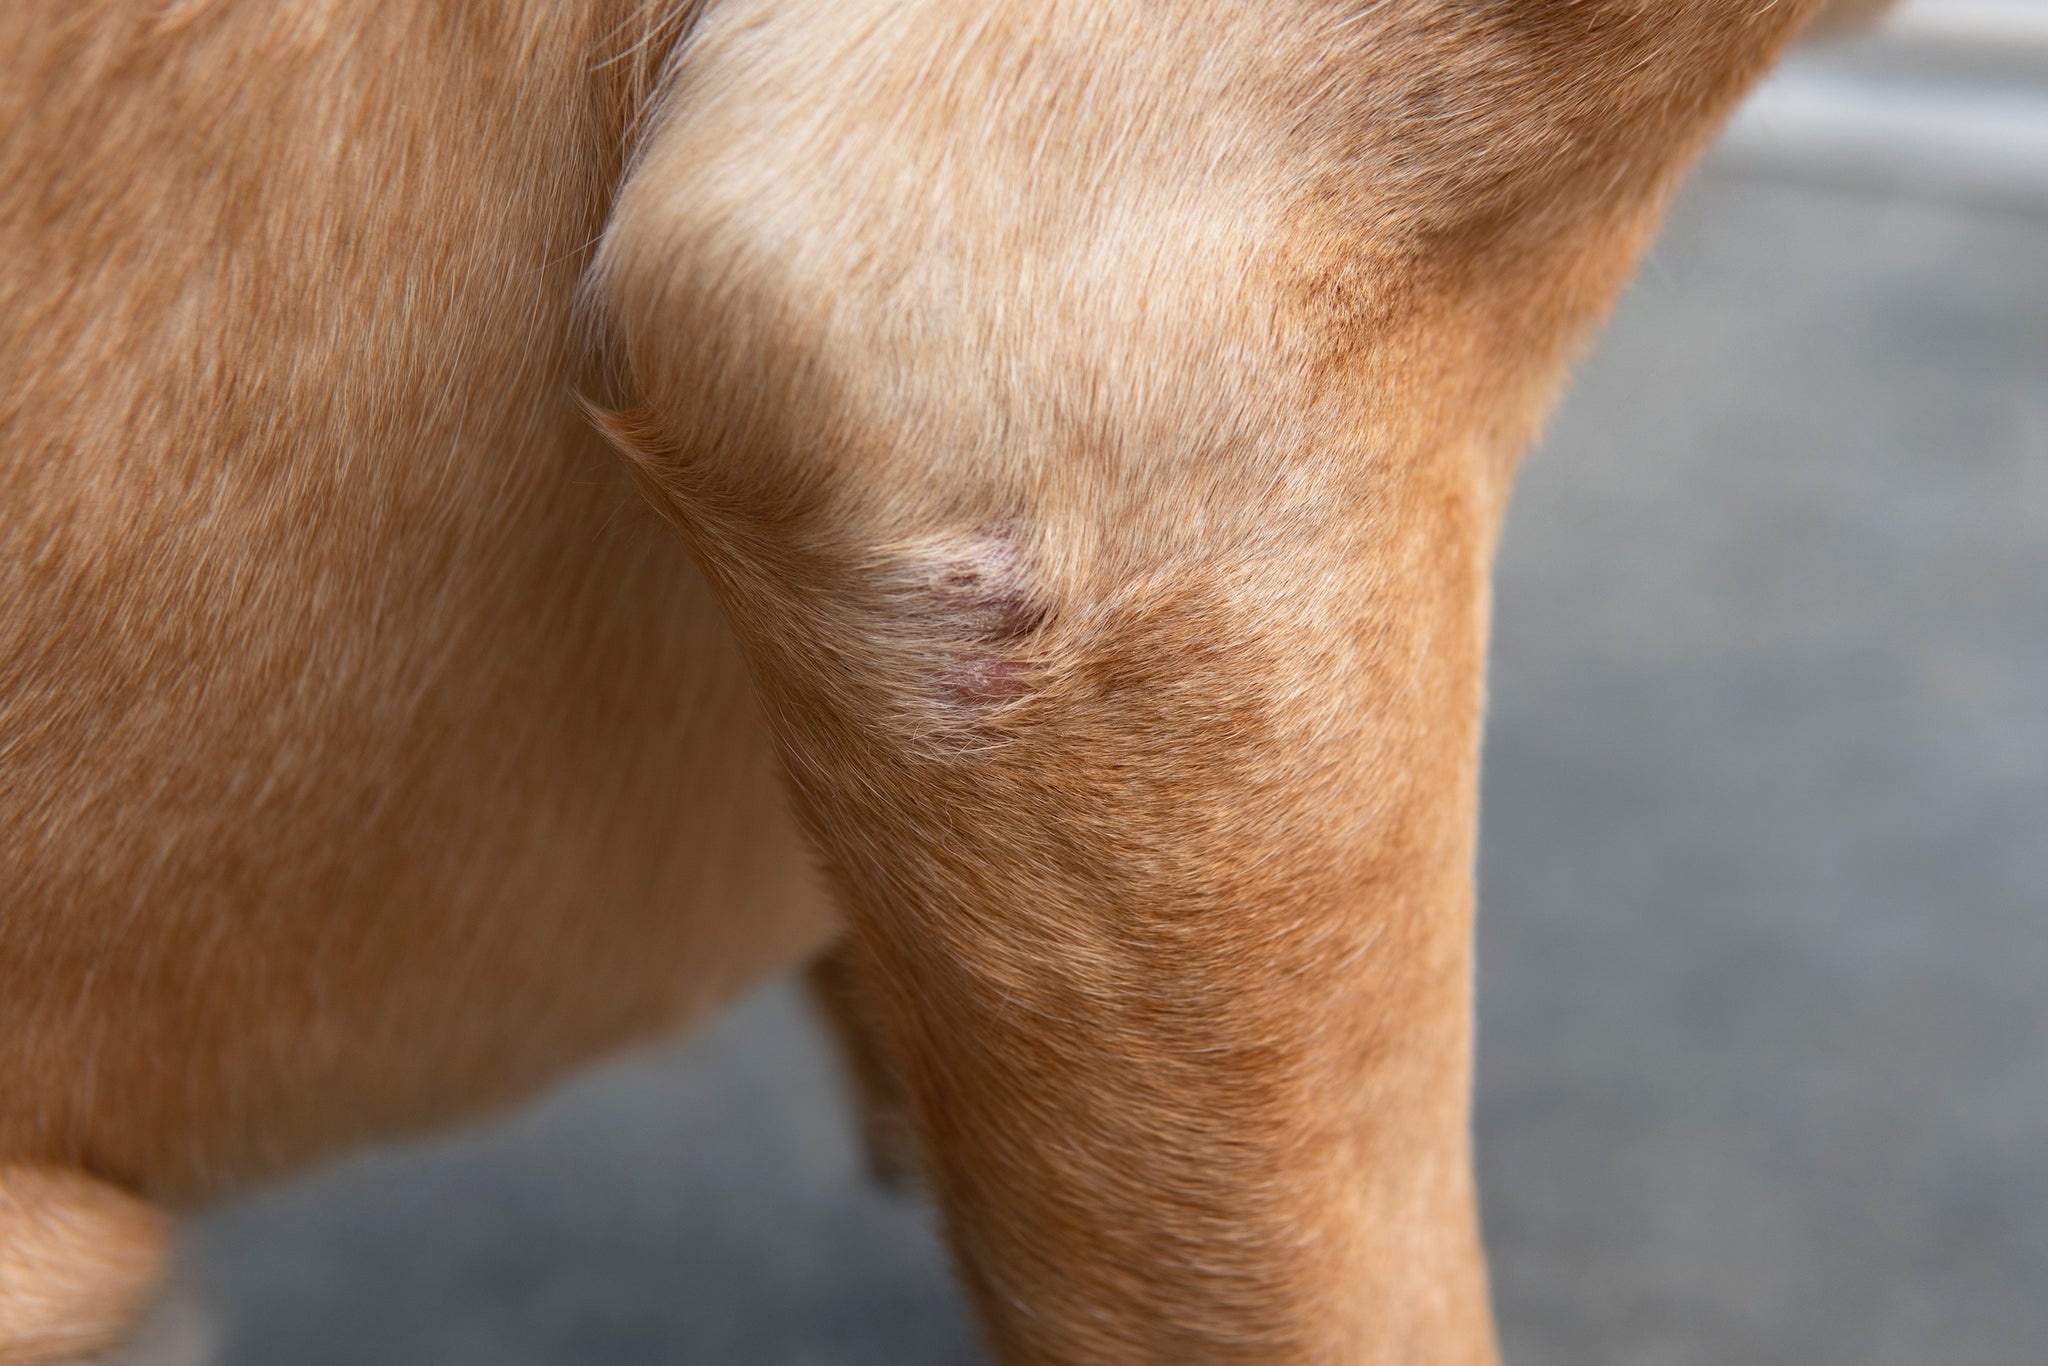 Close-up of a dog’s elbow joint. Joint pain and arthritis is a key symptom of lupus in dogs